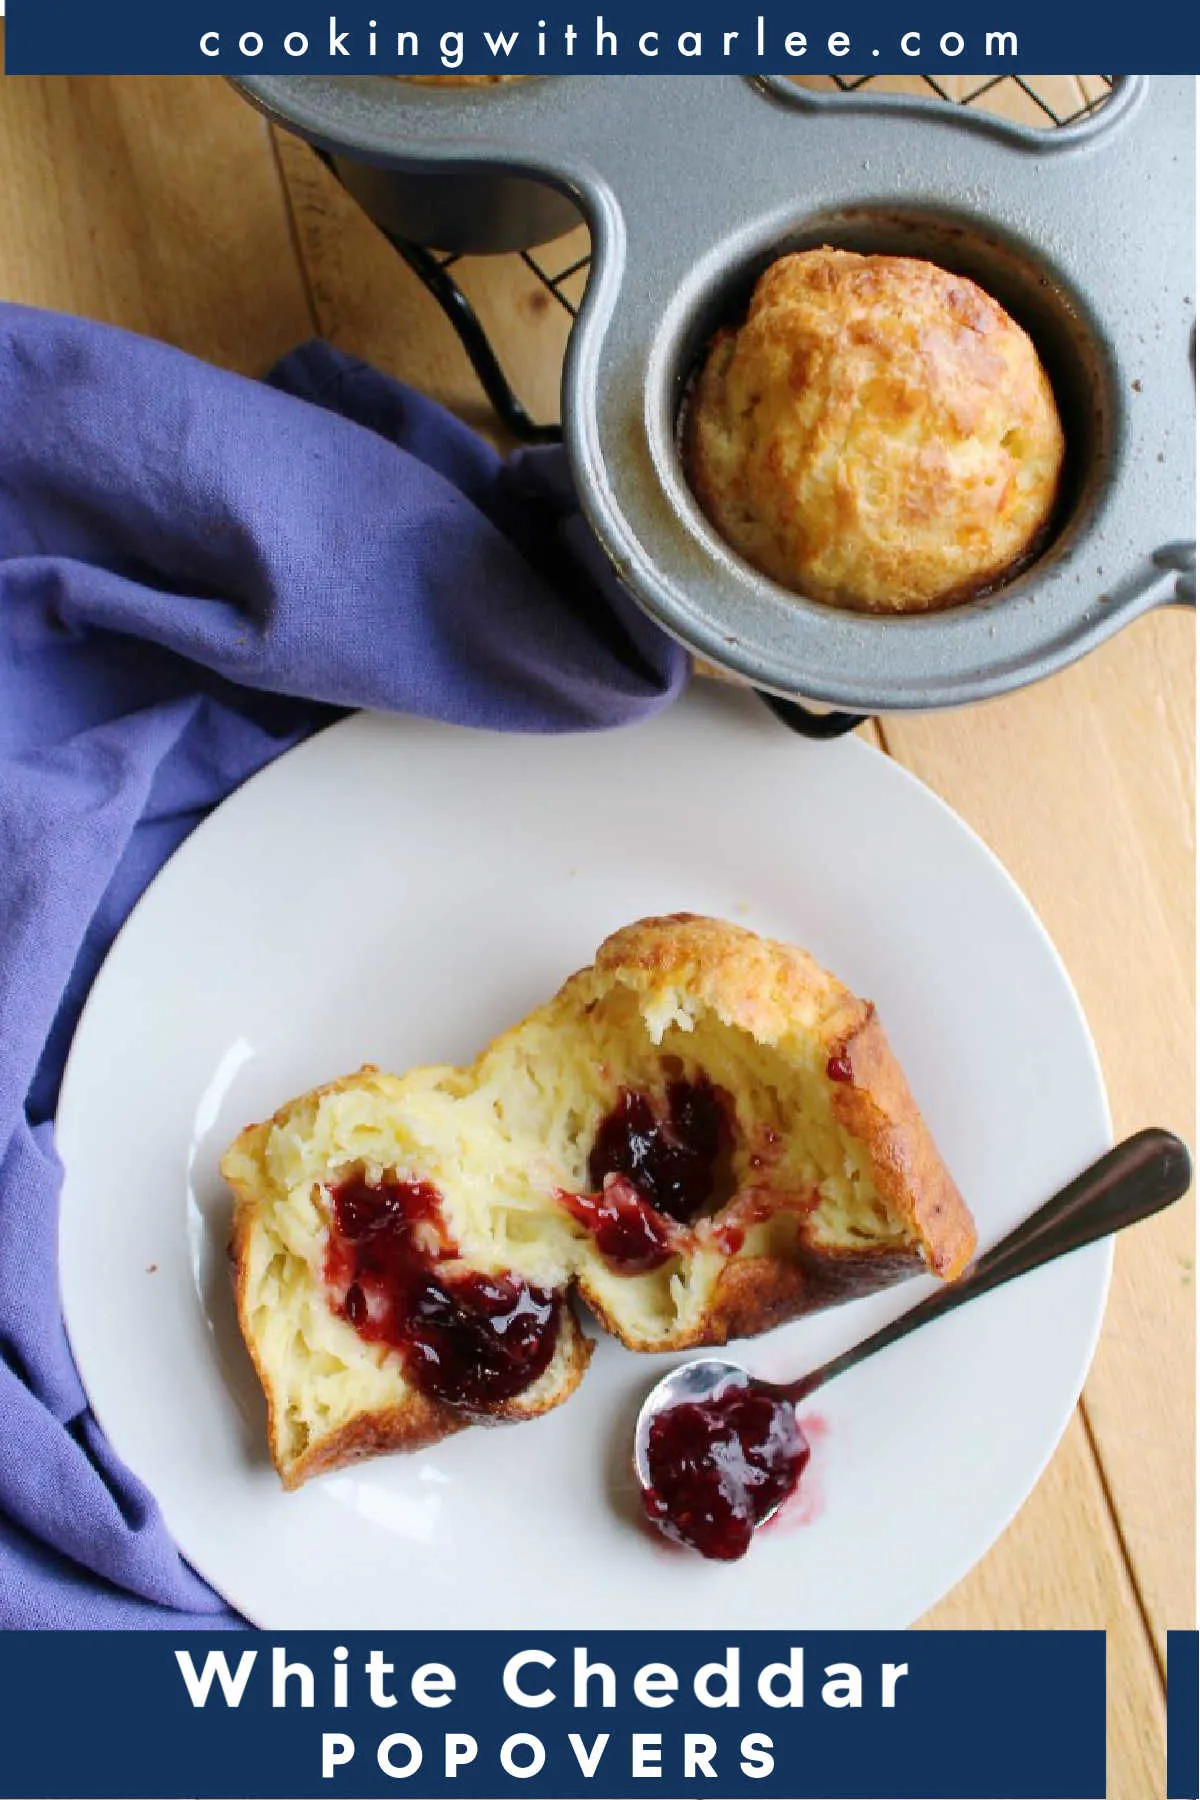 Fluffy, cheesy, eggy airy popovers are a thing of beauty. Top with some herb butter or fruit preserves for an extra special treat.